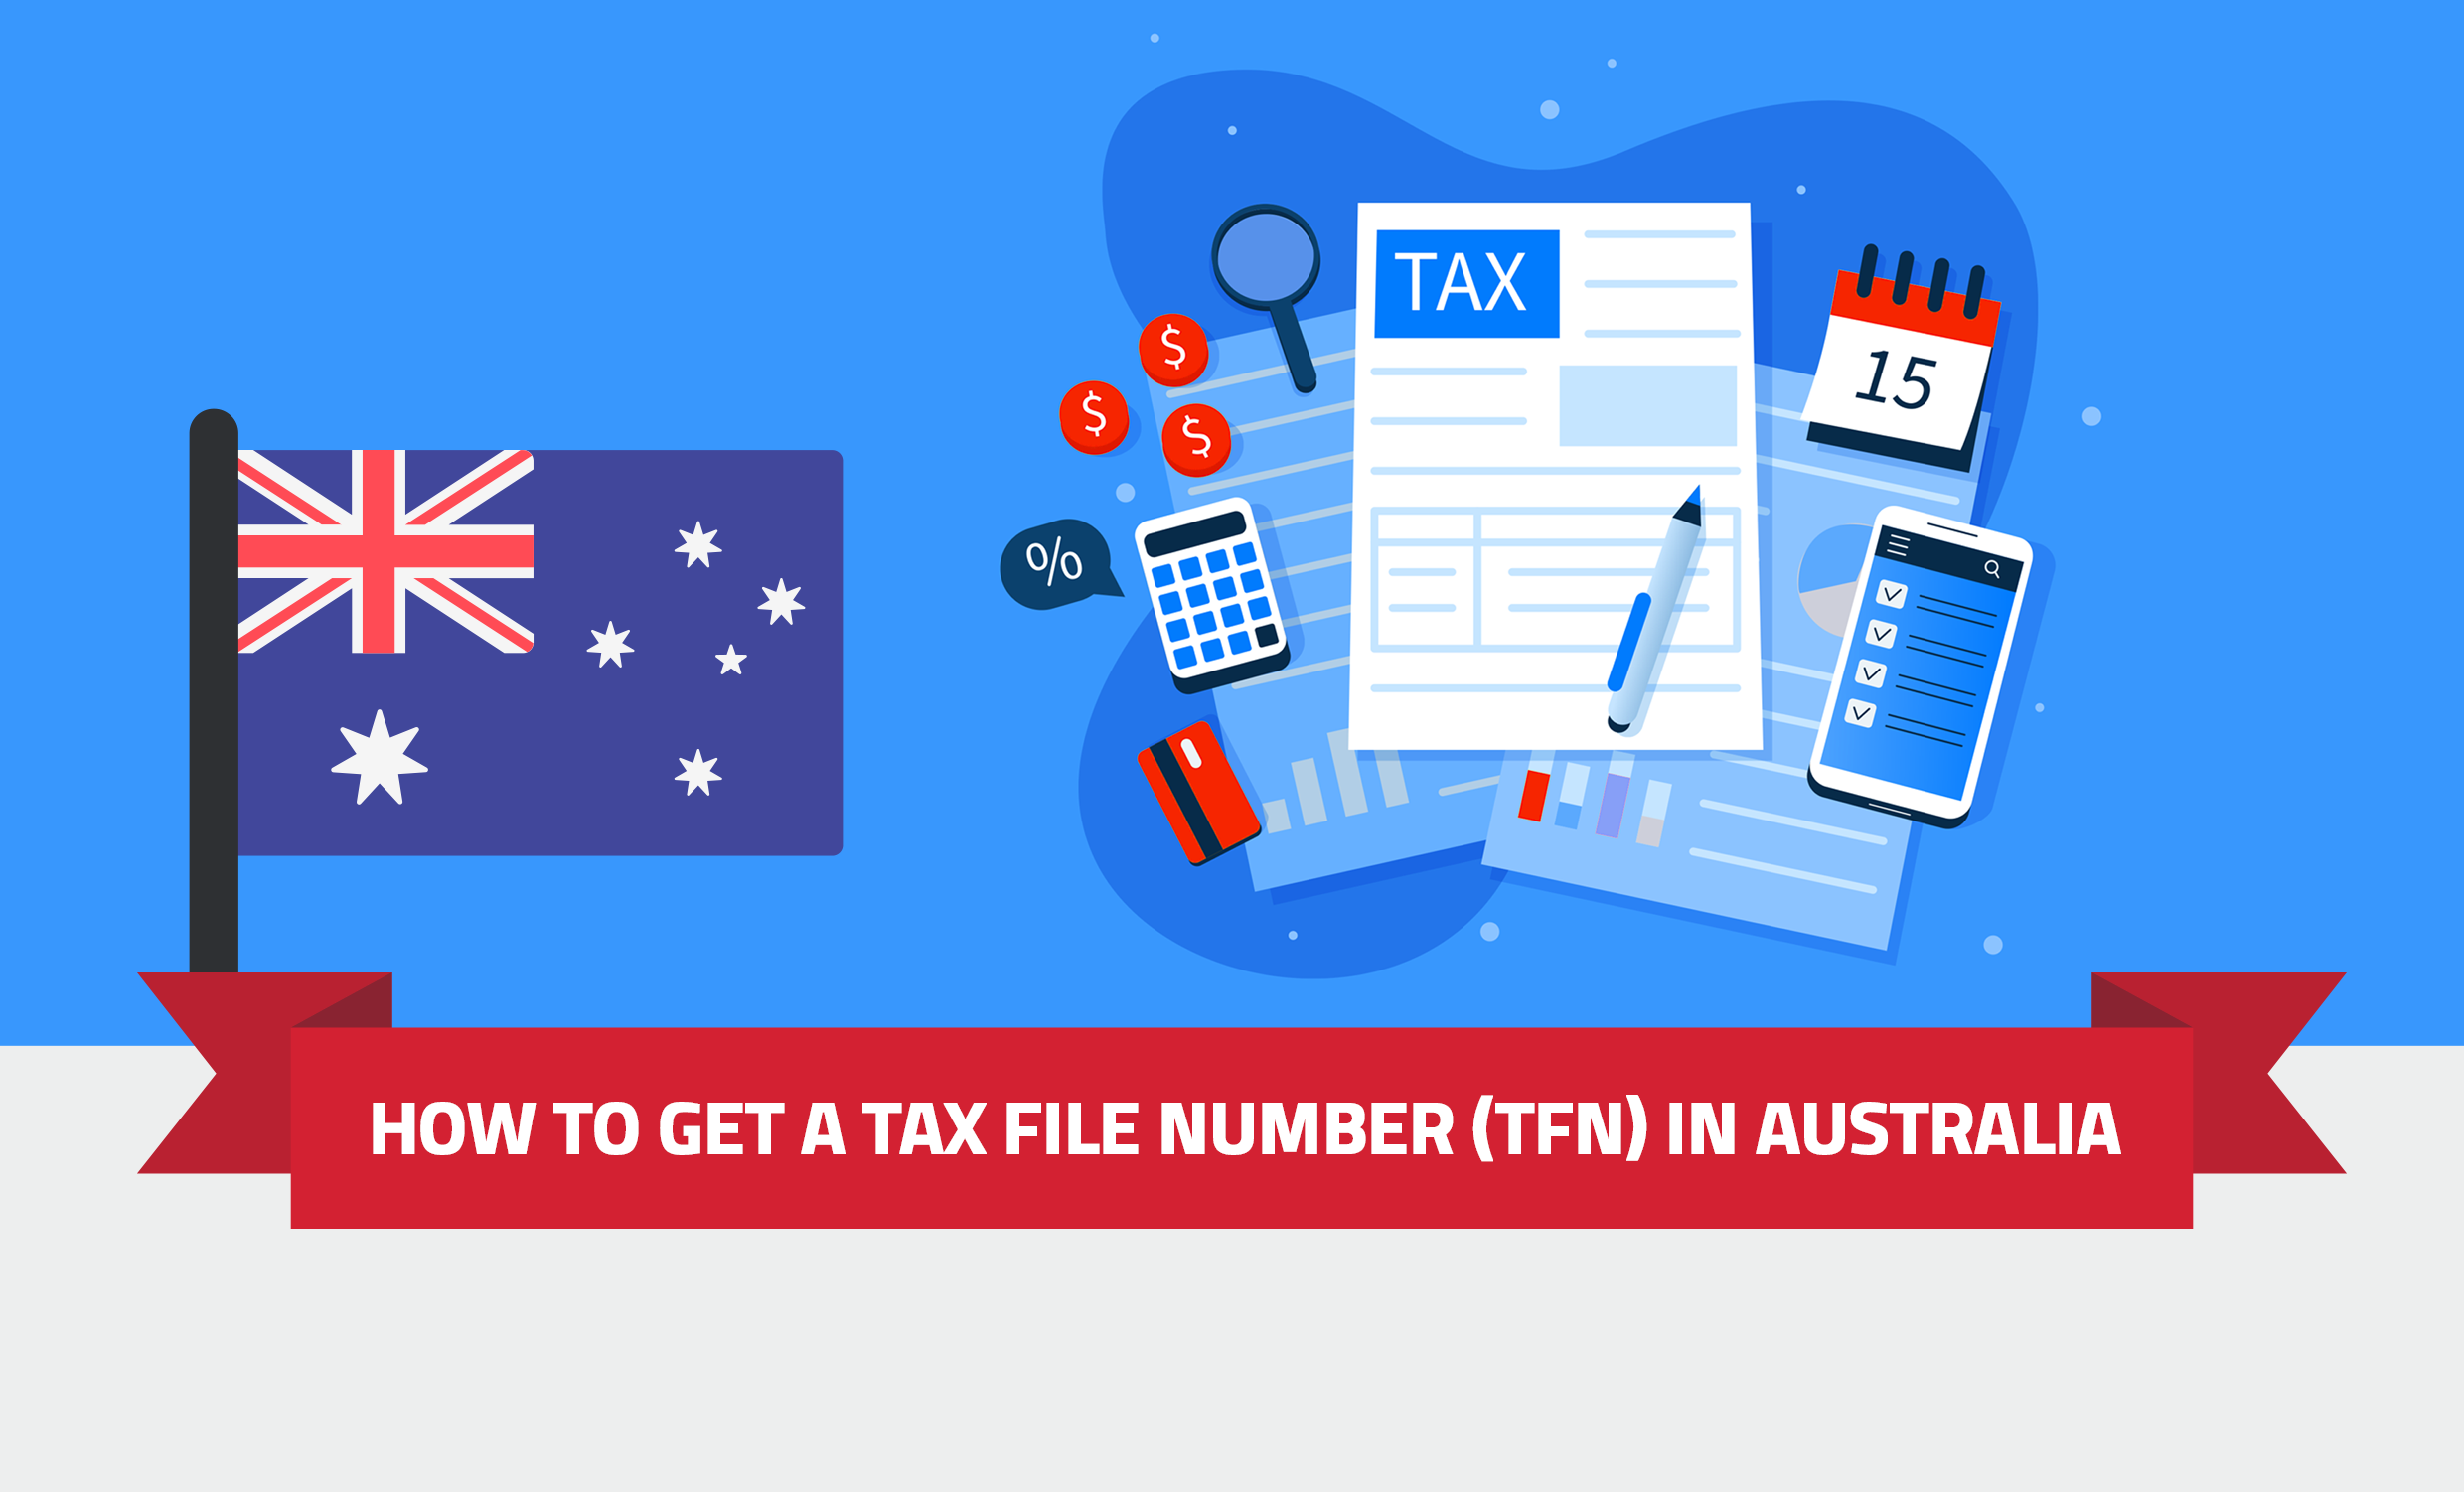 HOW TO GET A TAX FILE NUMBER (TFN) IN AUSTRALIA